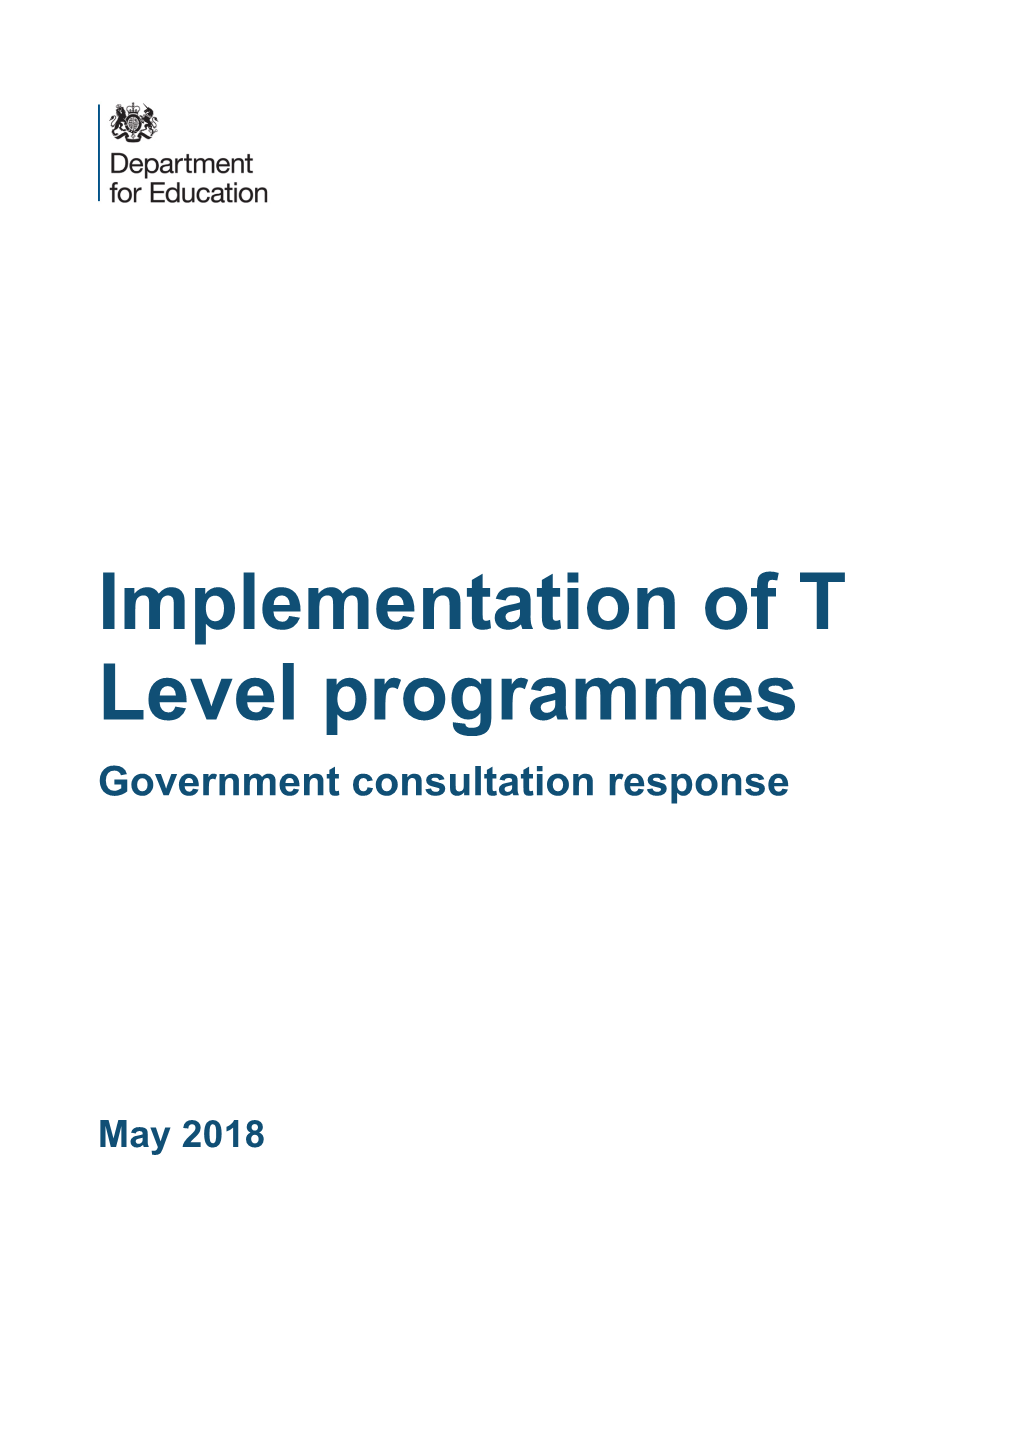 Implementation of T Level Programmes Government Consultation Response